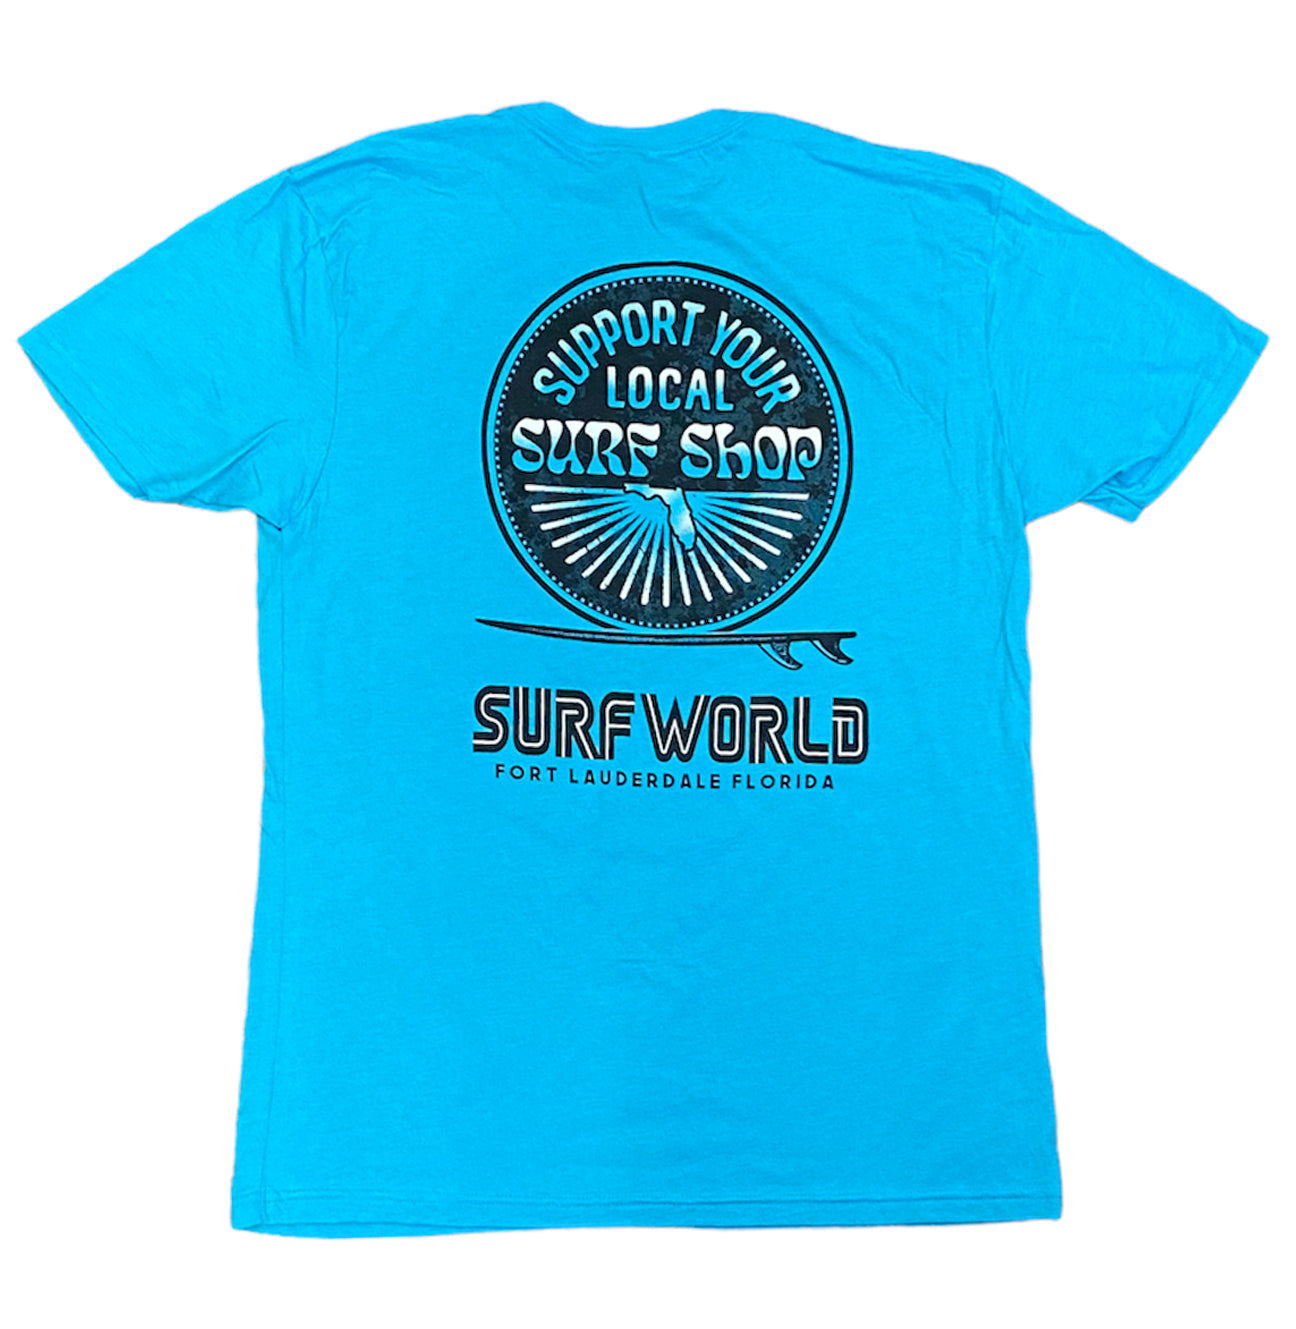 Surf World Support Your Local Surf Shop Tee Florida - Multi Colors Mens T Shirt Carib Blue